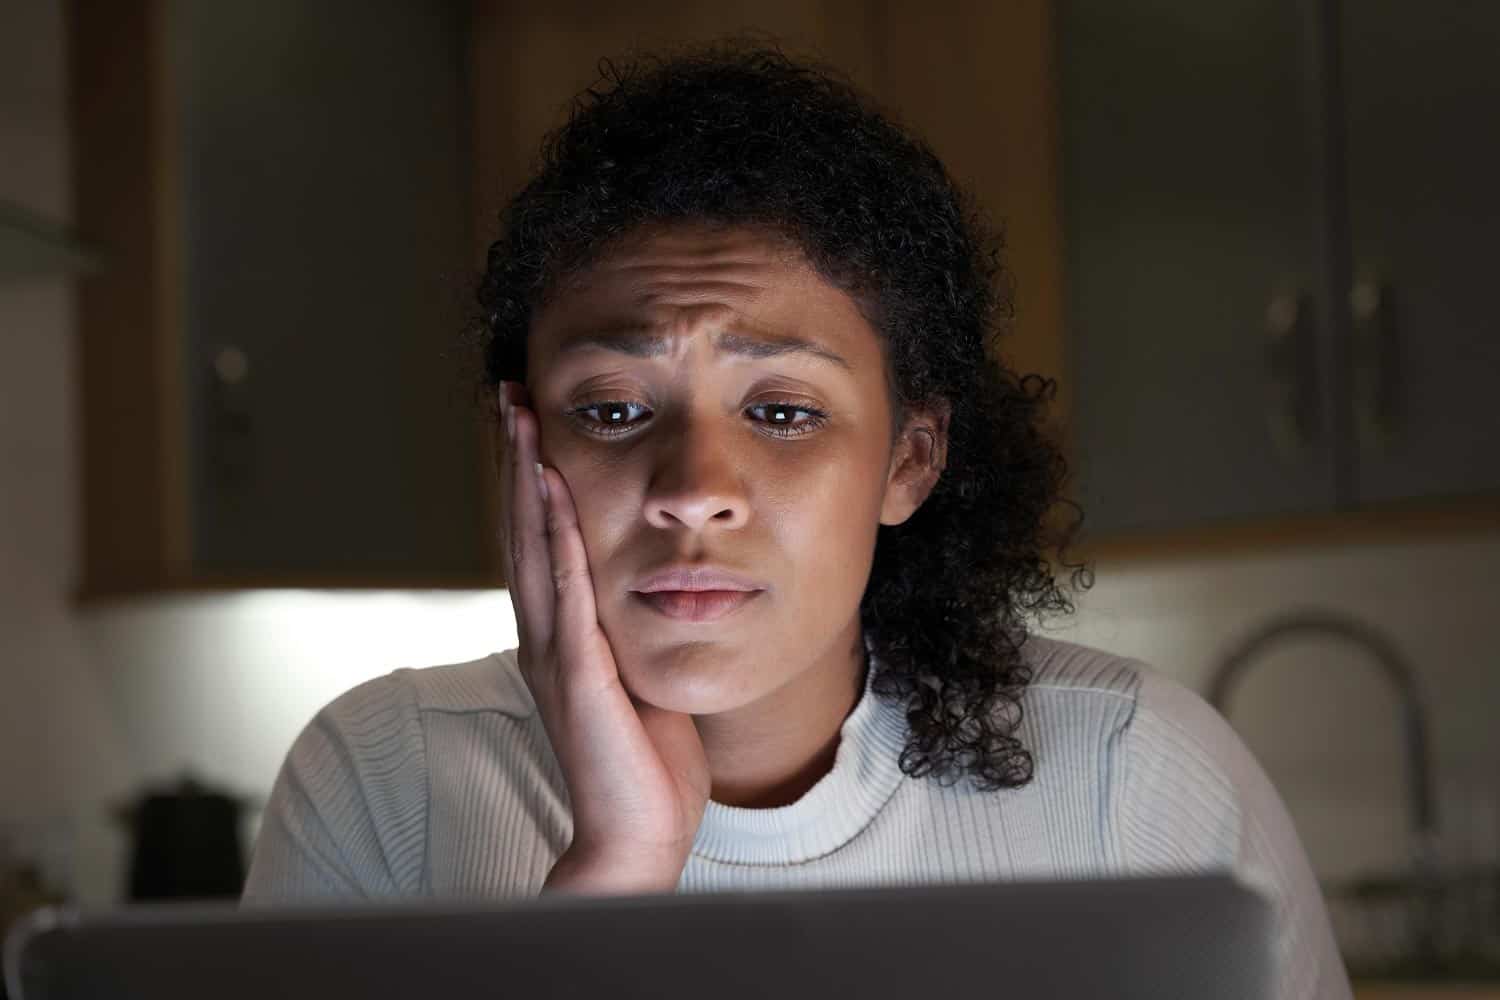 A young woman in front of a computer screen looking anxious.